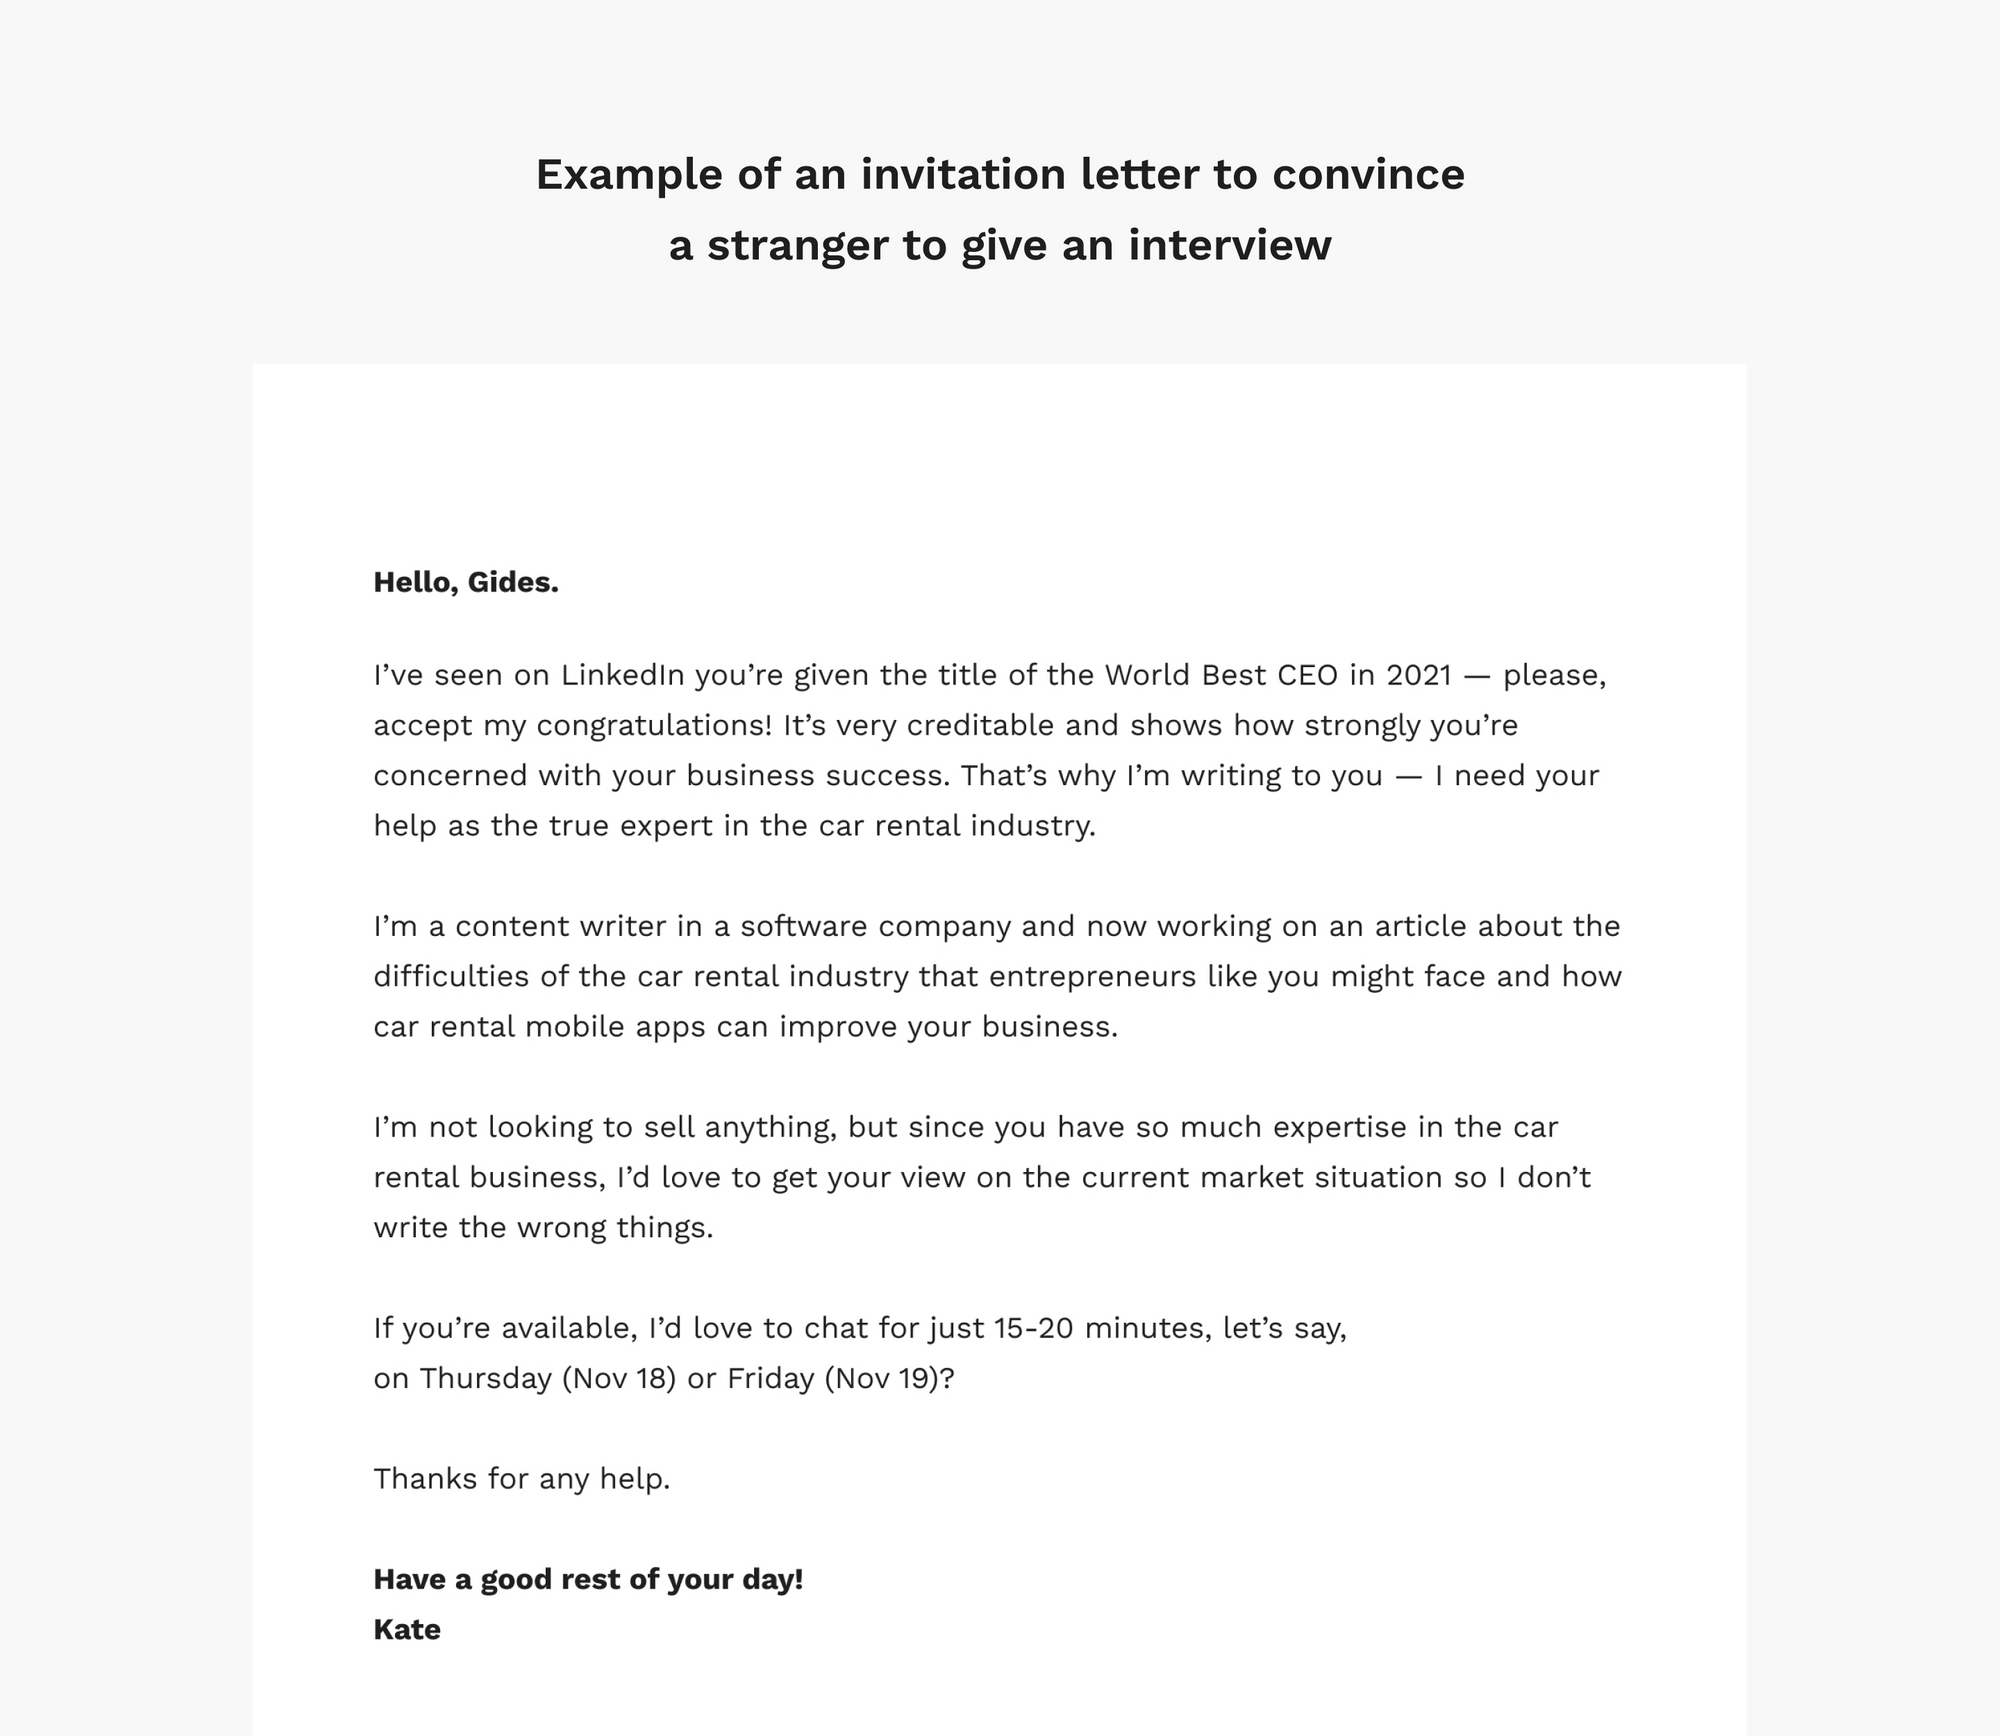 Example of an invitation letter to convince a stranger to give an interview